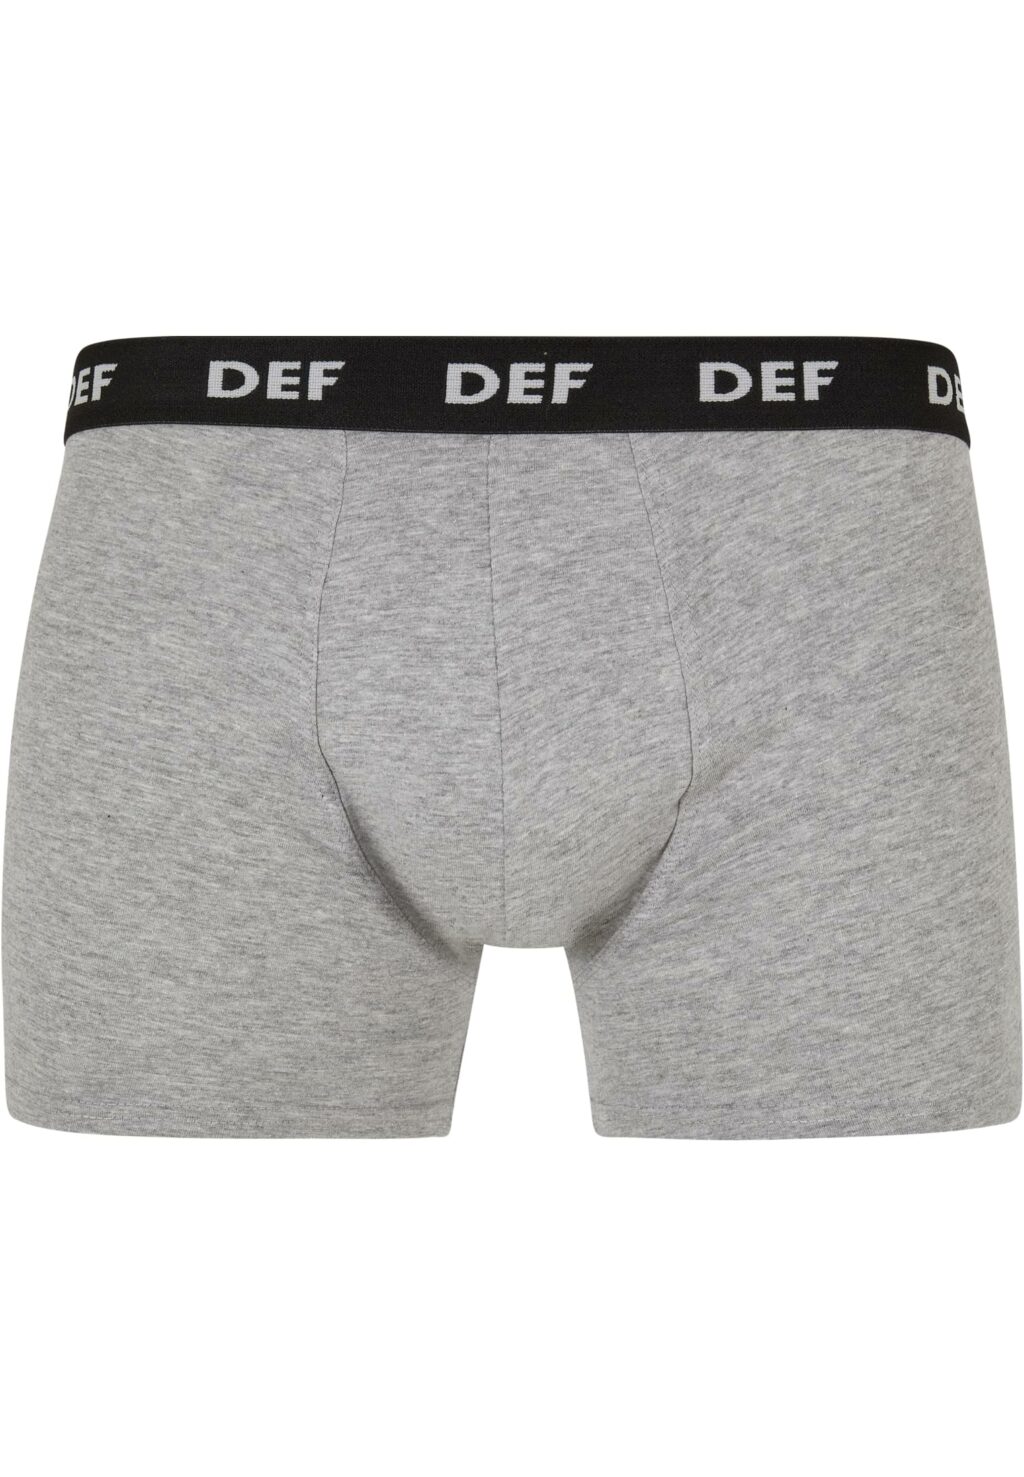 DEF Cost 3-Pack Boxershorts grey DFBX009